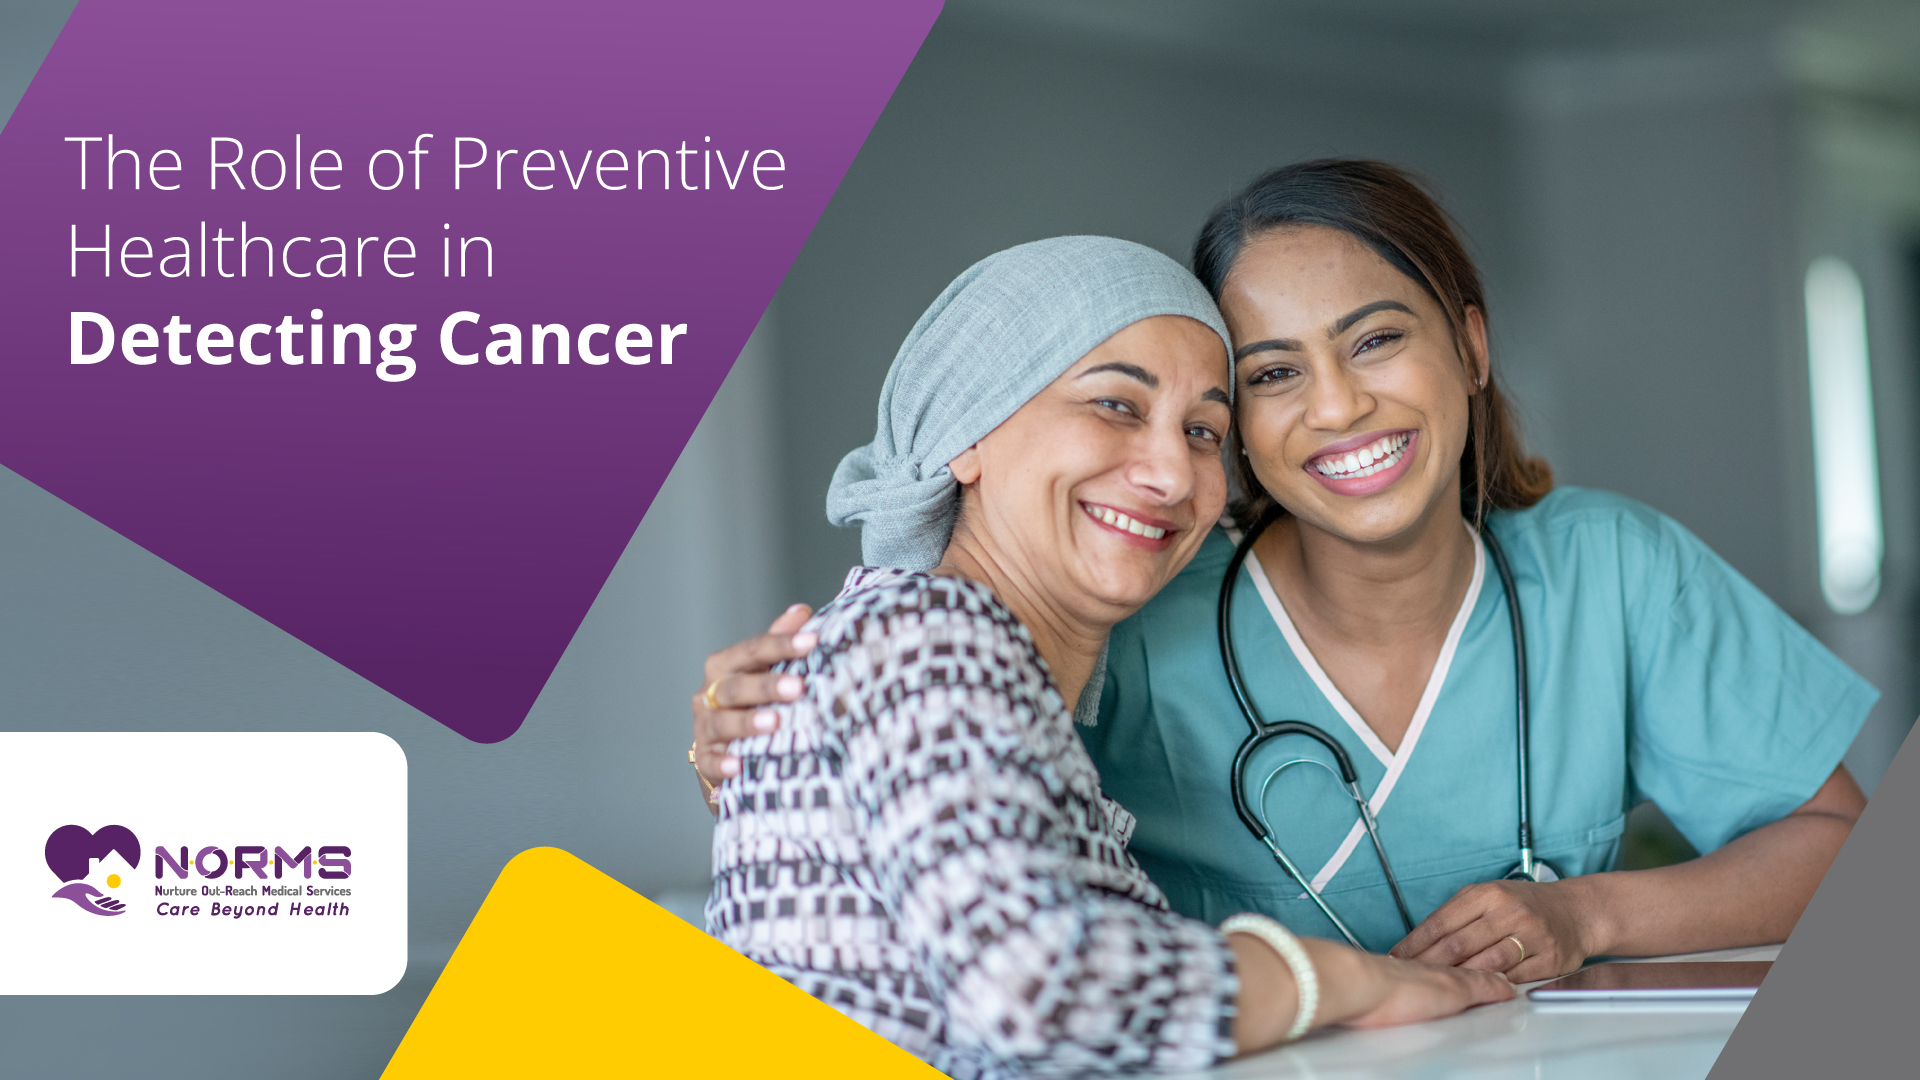 How does preventive healthcare help in detecting cancer